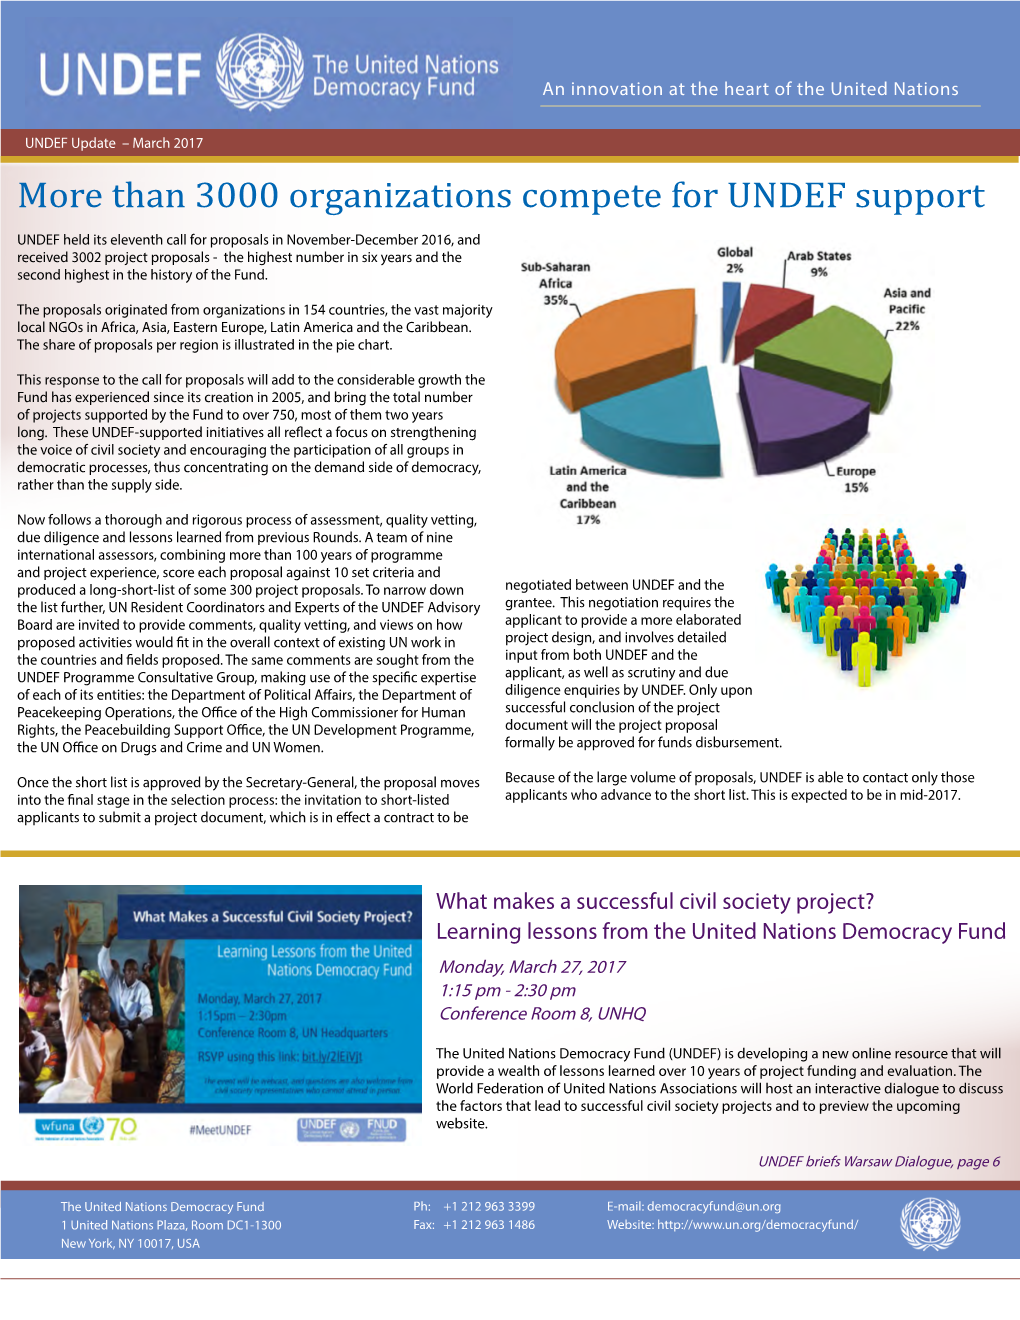 More Than 3000 Organizations Compete for UNDEF Support